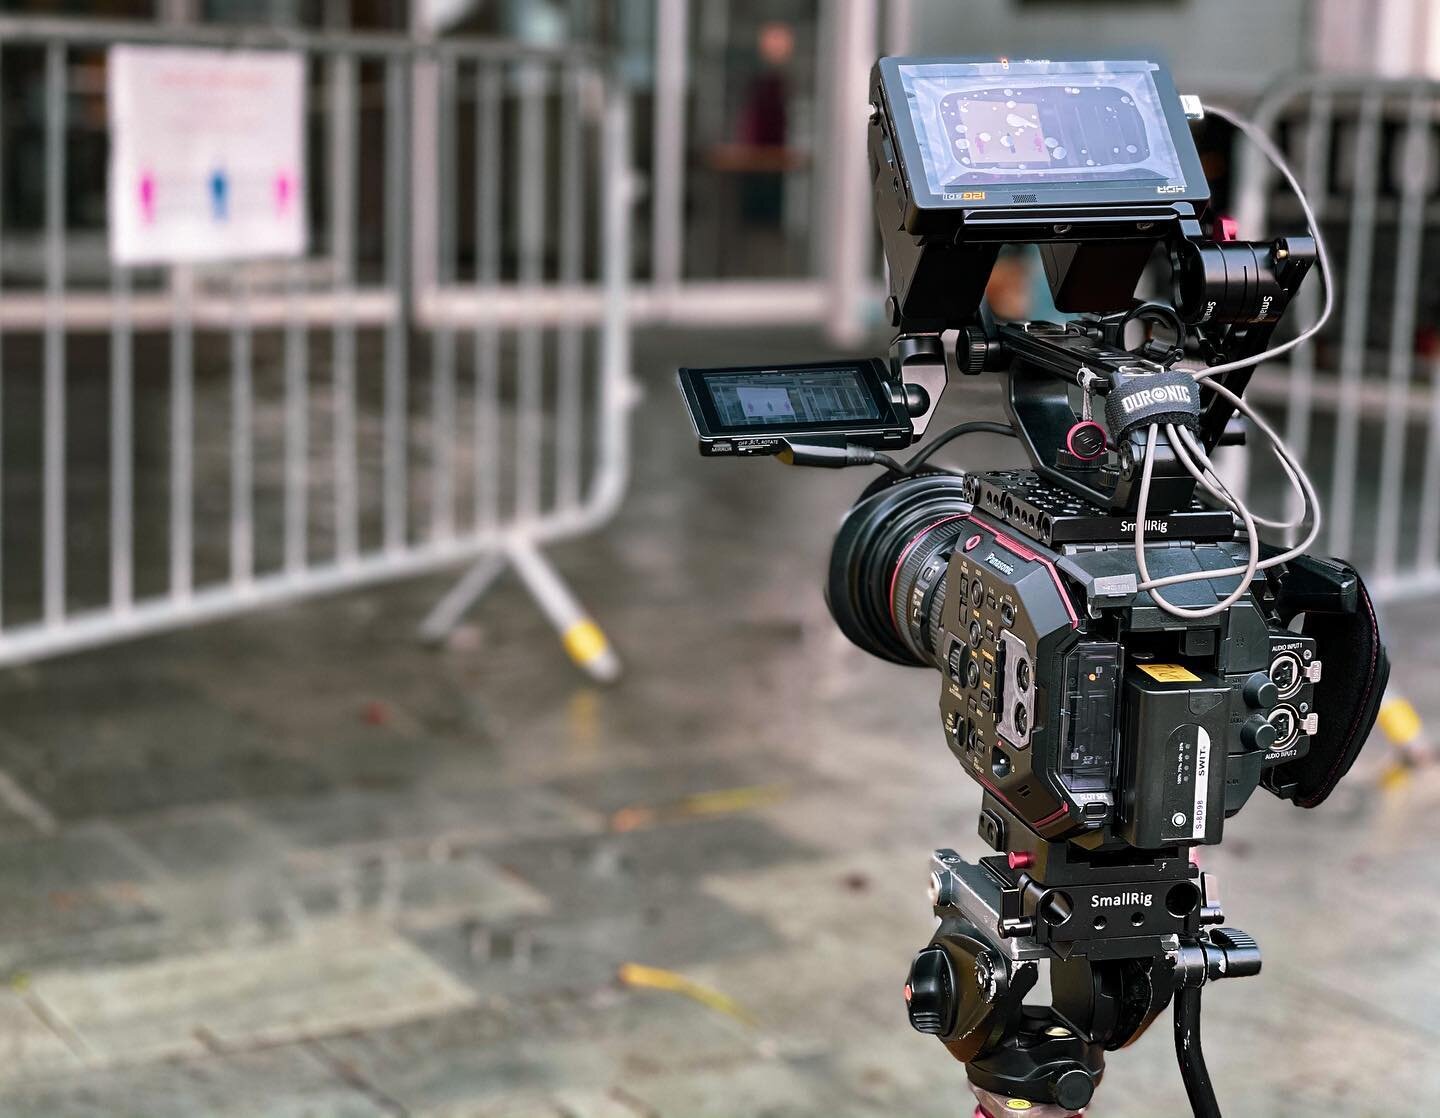 More filming for @epsomewellbc today, we spoke with Cllr Dallen about the boroughs support for business during the pandemic.
.
.
🎥 @panasonicproeu @sonyalpha 
🎞 @blackmagicnewsofficial @manfrottoimaginemore @andycinegear.
💡 @pixapro.
🎤 @sennheise